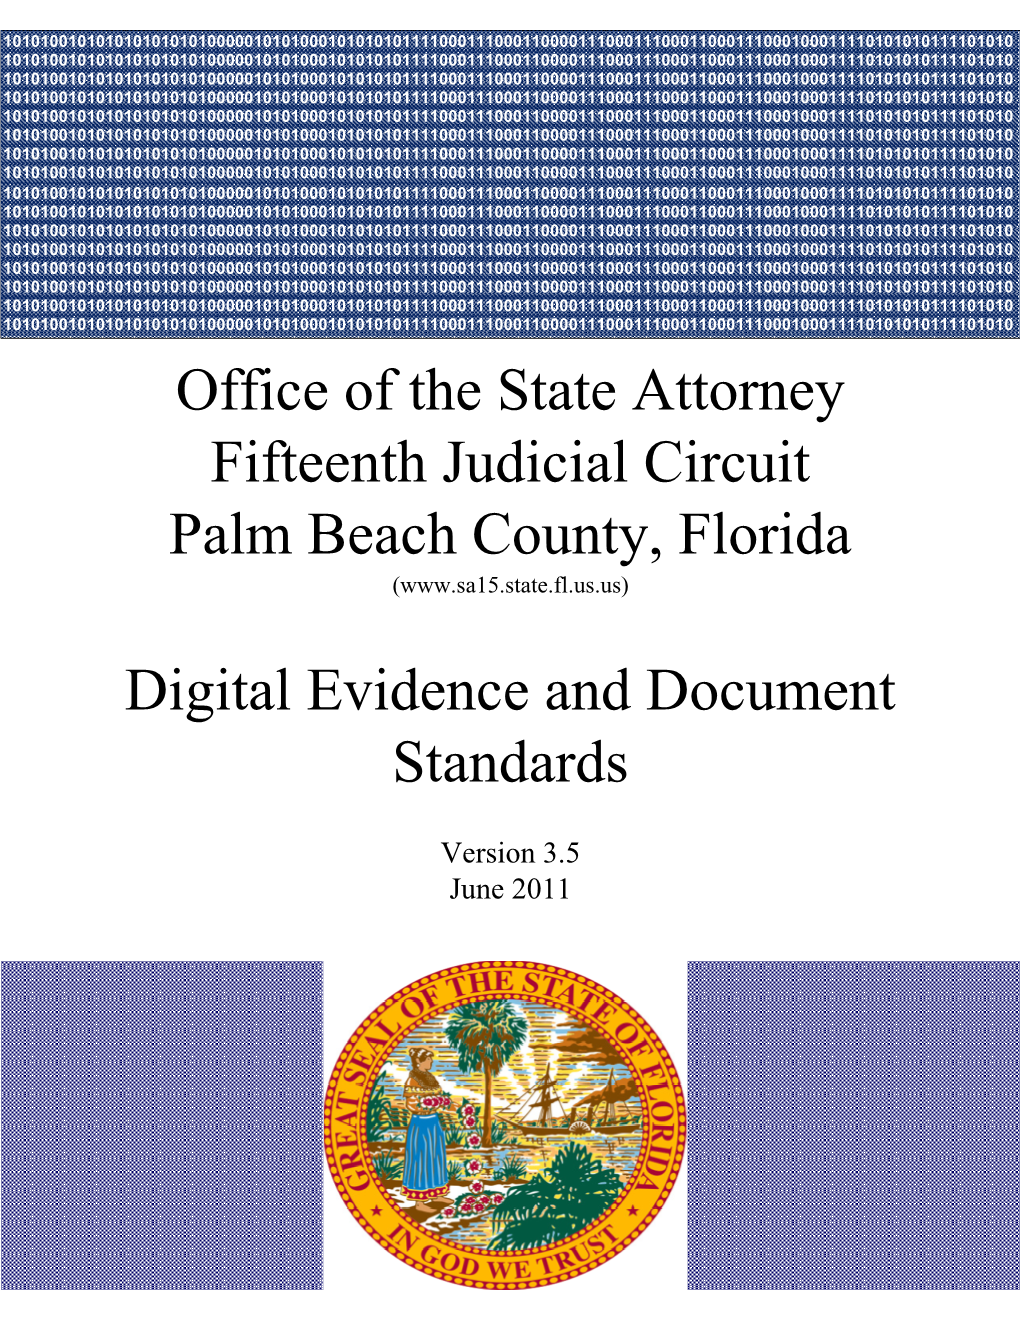 Office of the State Attorney Fifteenth Judicial Circuit Palm Beach County, Florida (